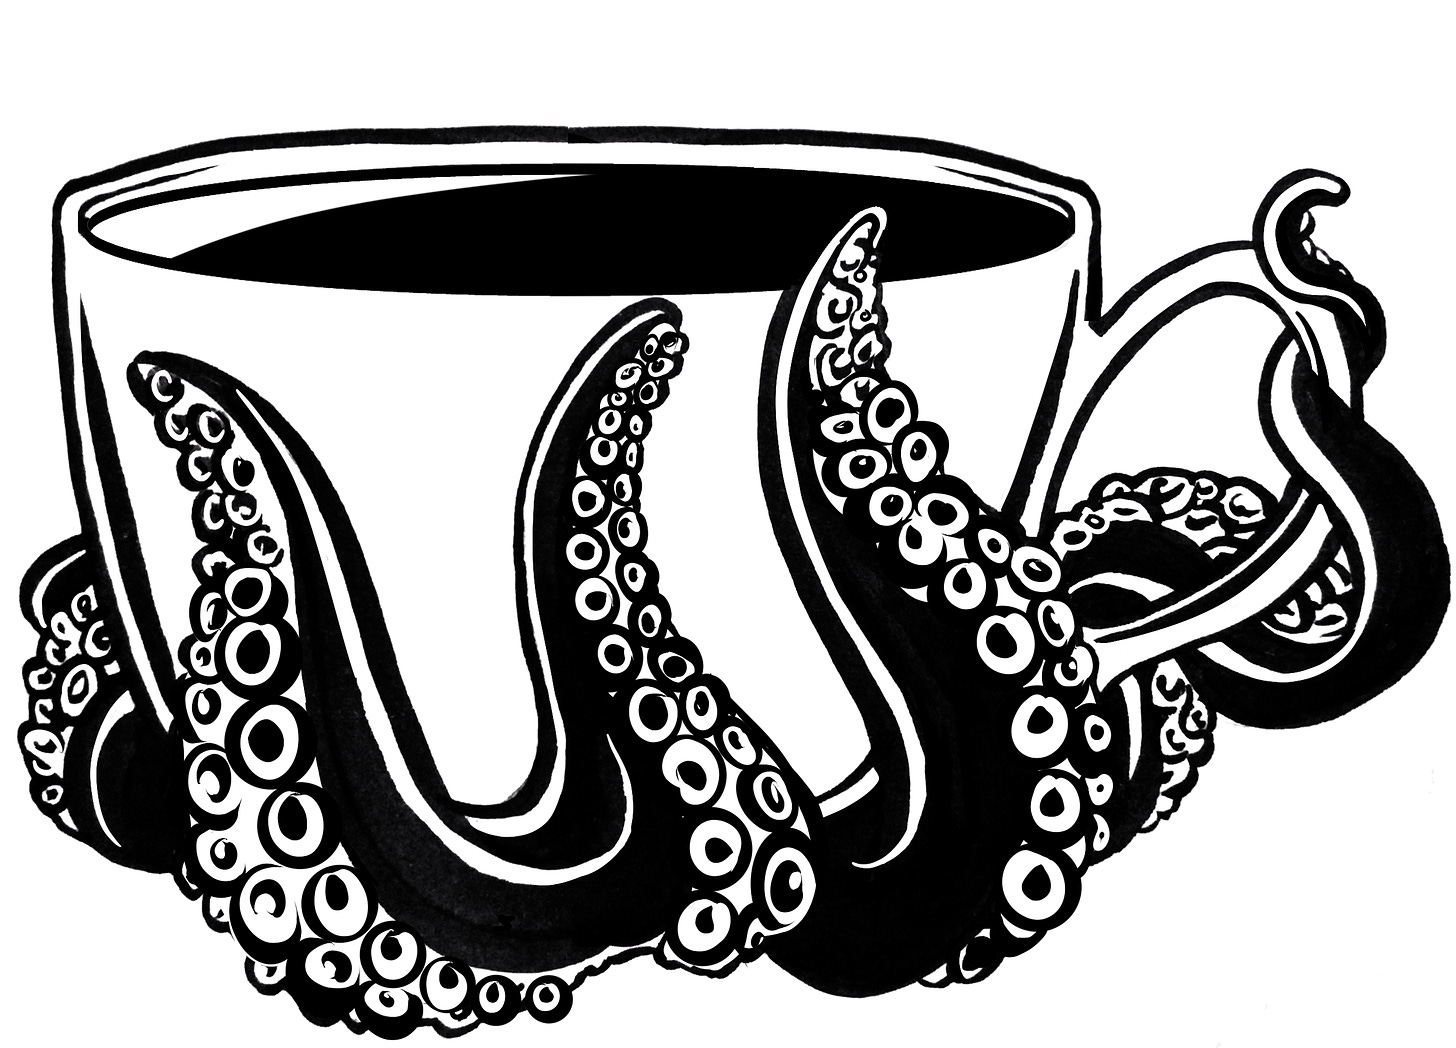 A black and white cartoon illustration of a plain white teacup clutched by some black, suckered tentacles, with one tentacle curling around the handle